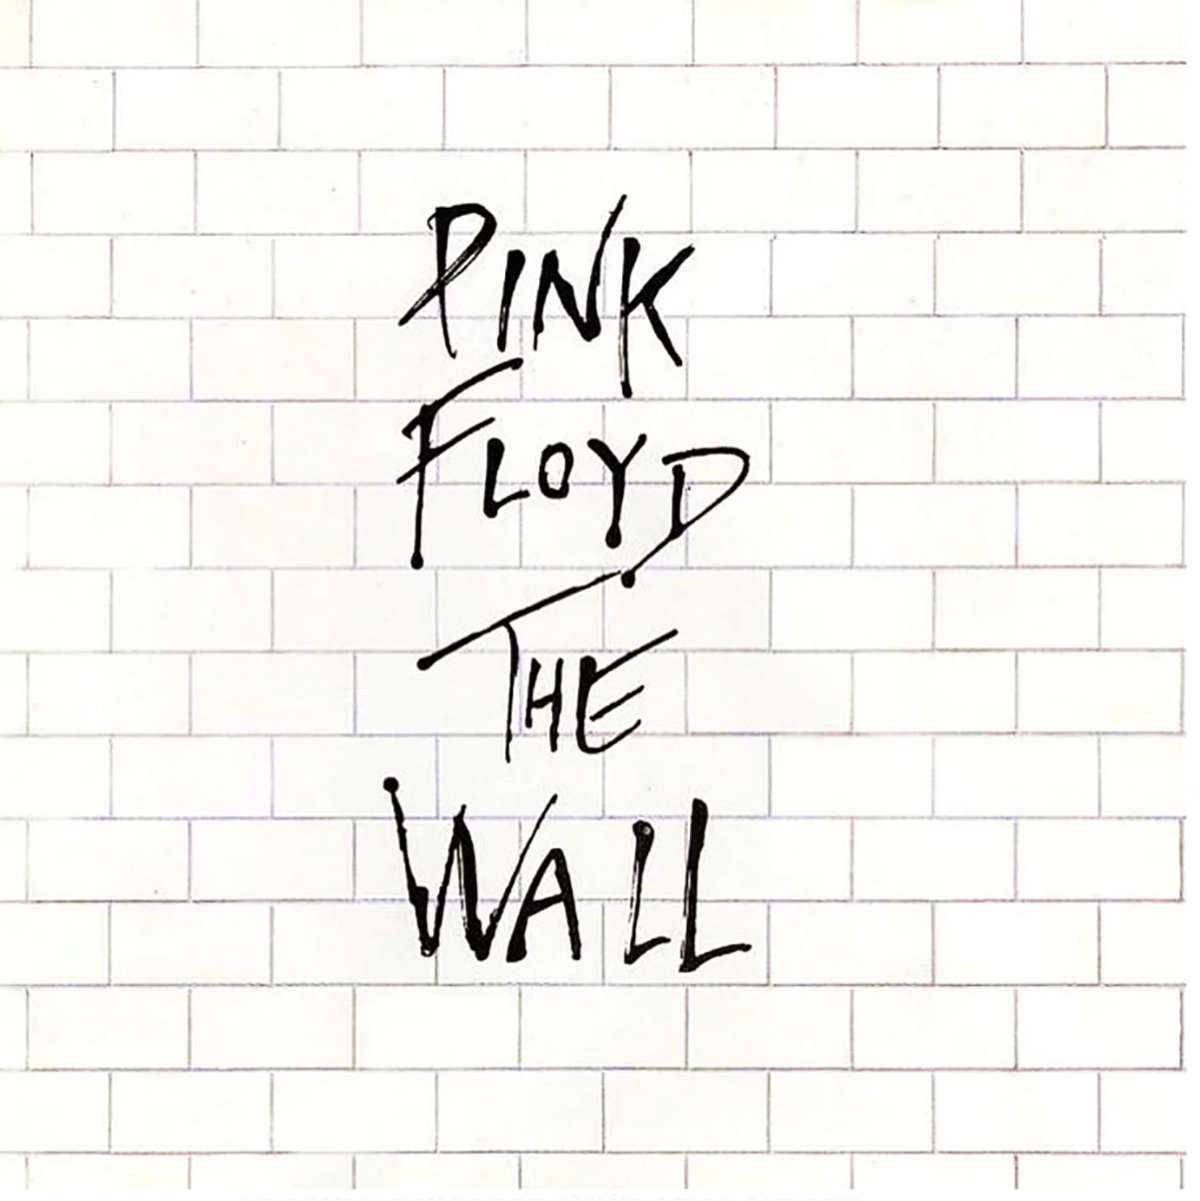 The Wall album cover